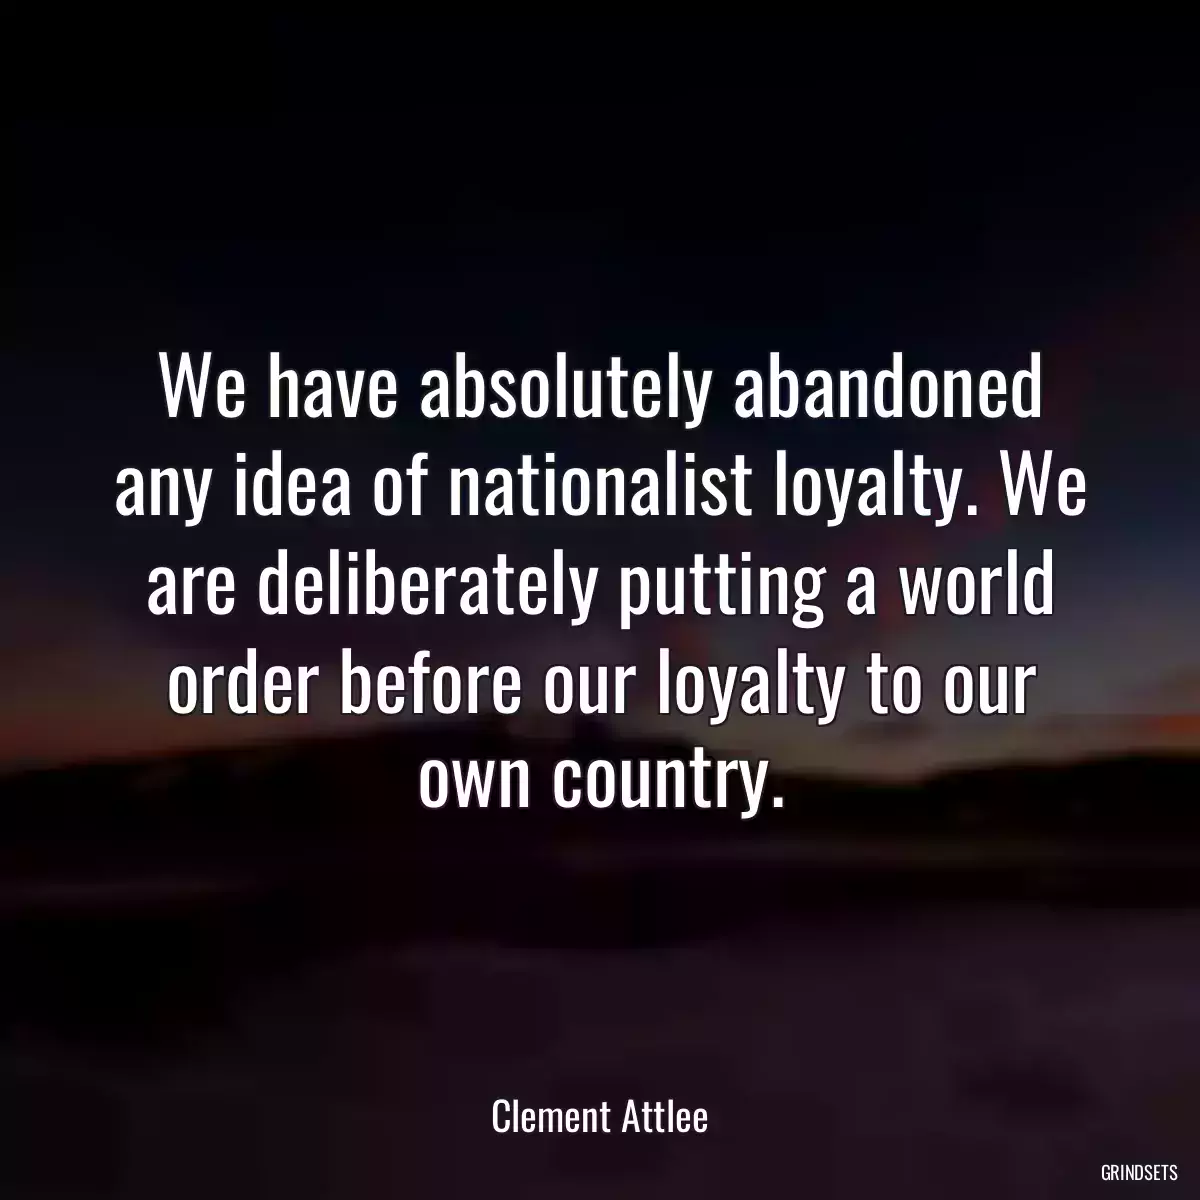 We have absolutely abandoned any idea of nationalist loyalty. We are deliberately putting a world order before our loyalty to our own country.